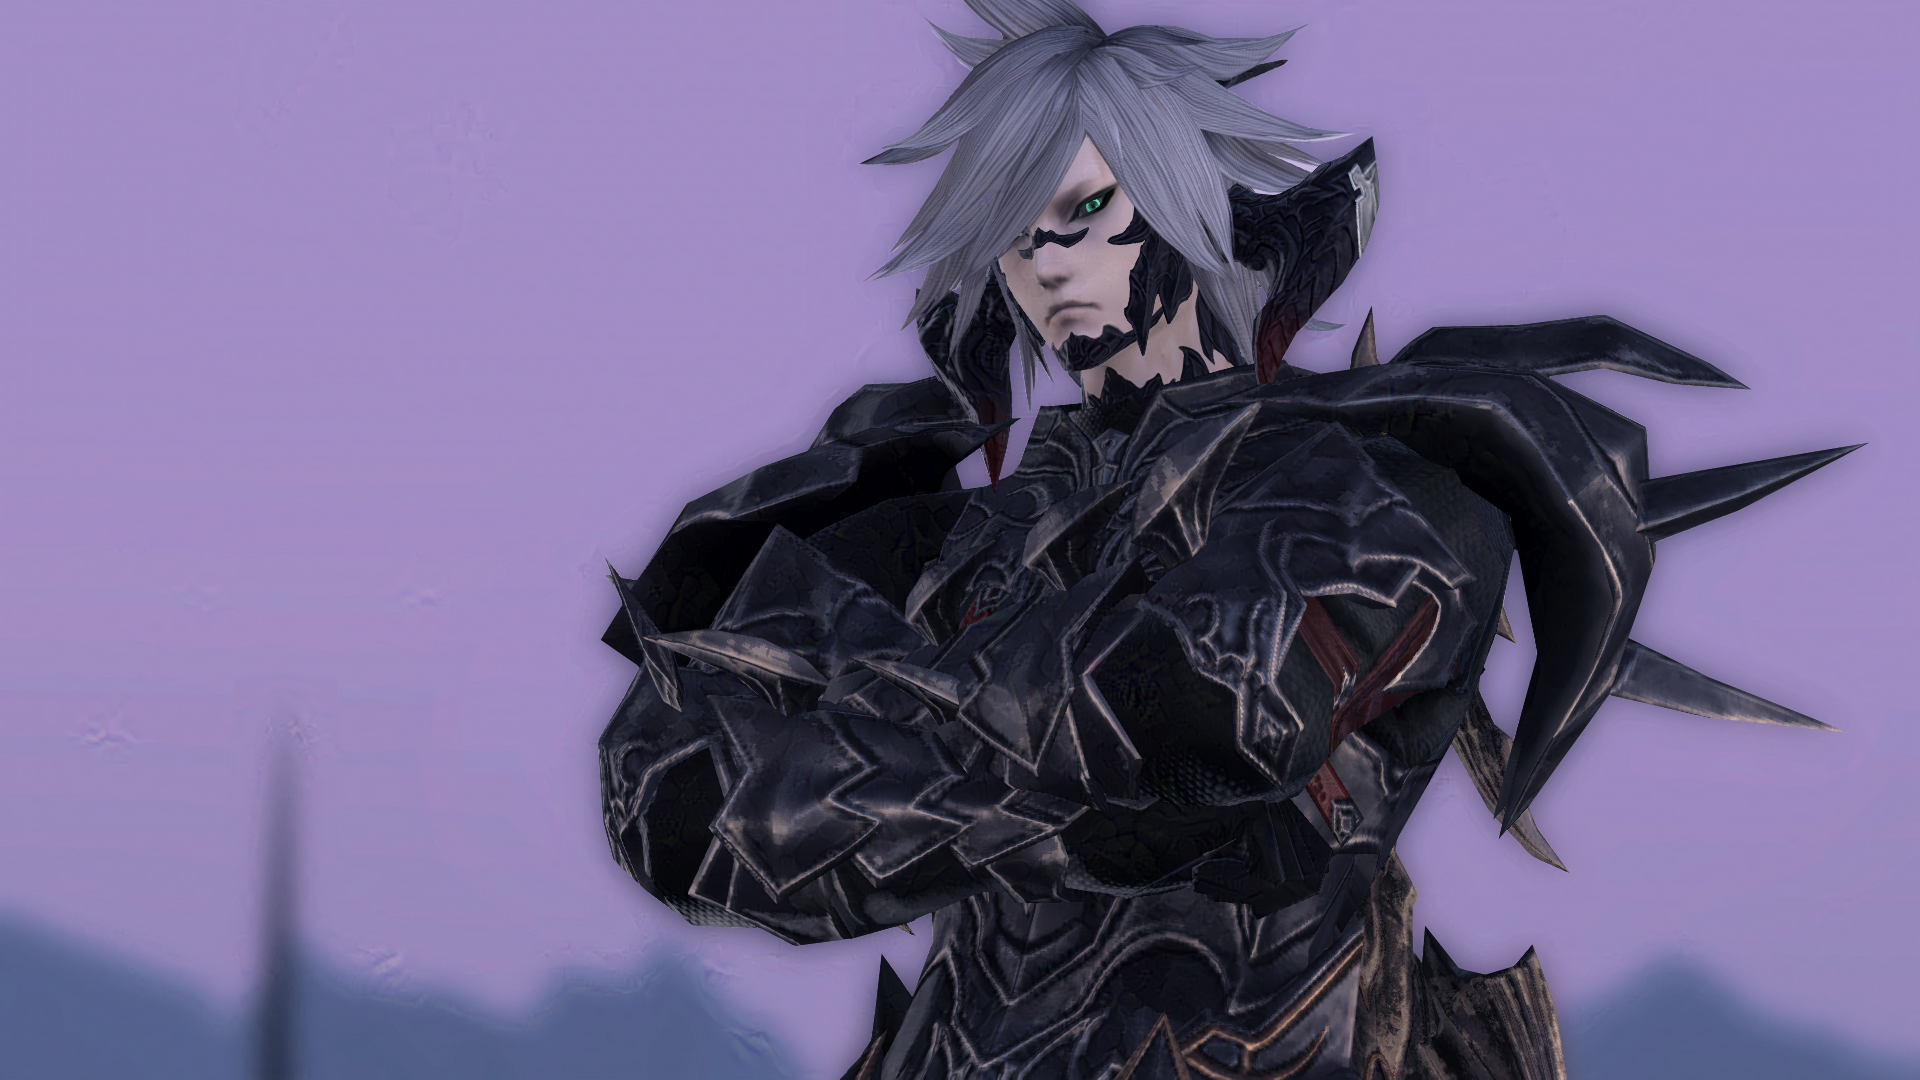 Sidurgu - an Au Ra of the Xaela clan, looks at the viewer with a neutral expression, his arms crossed.